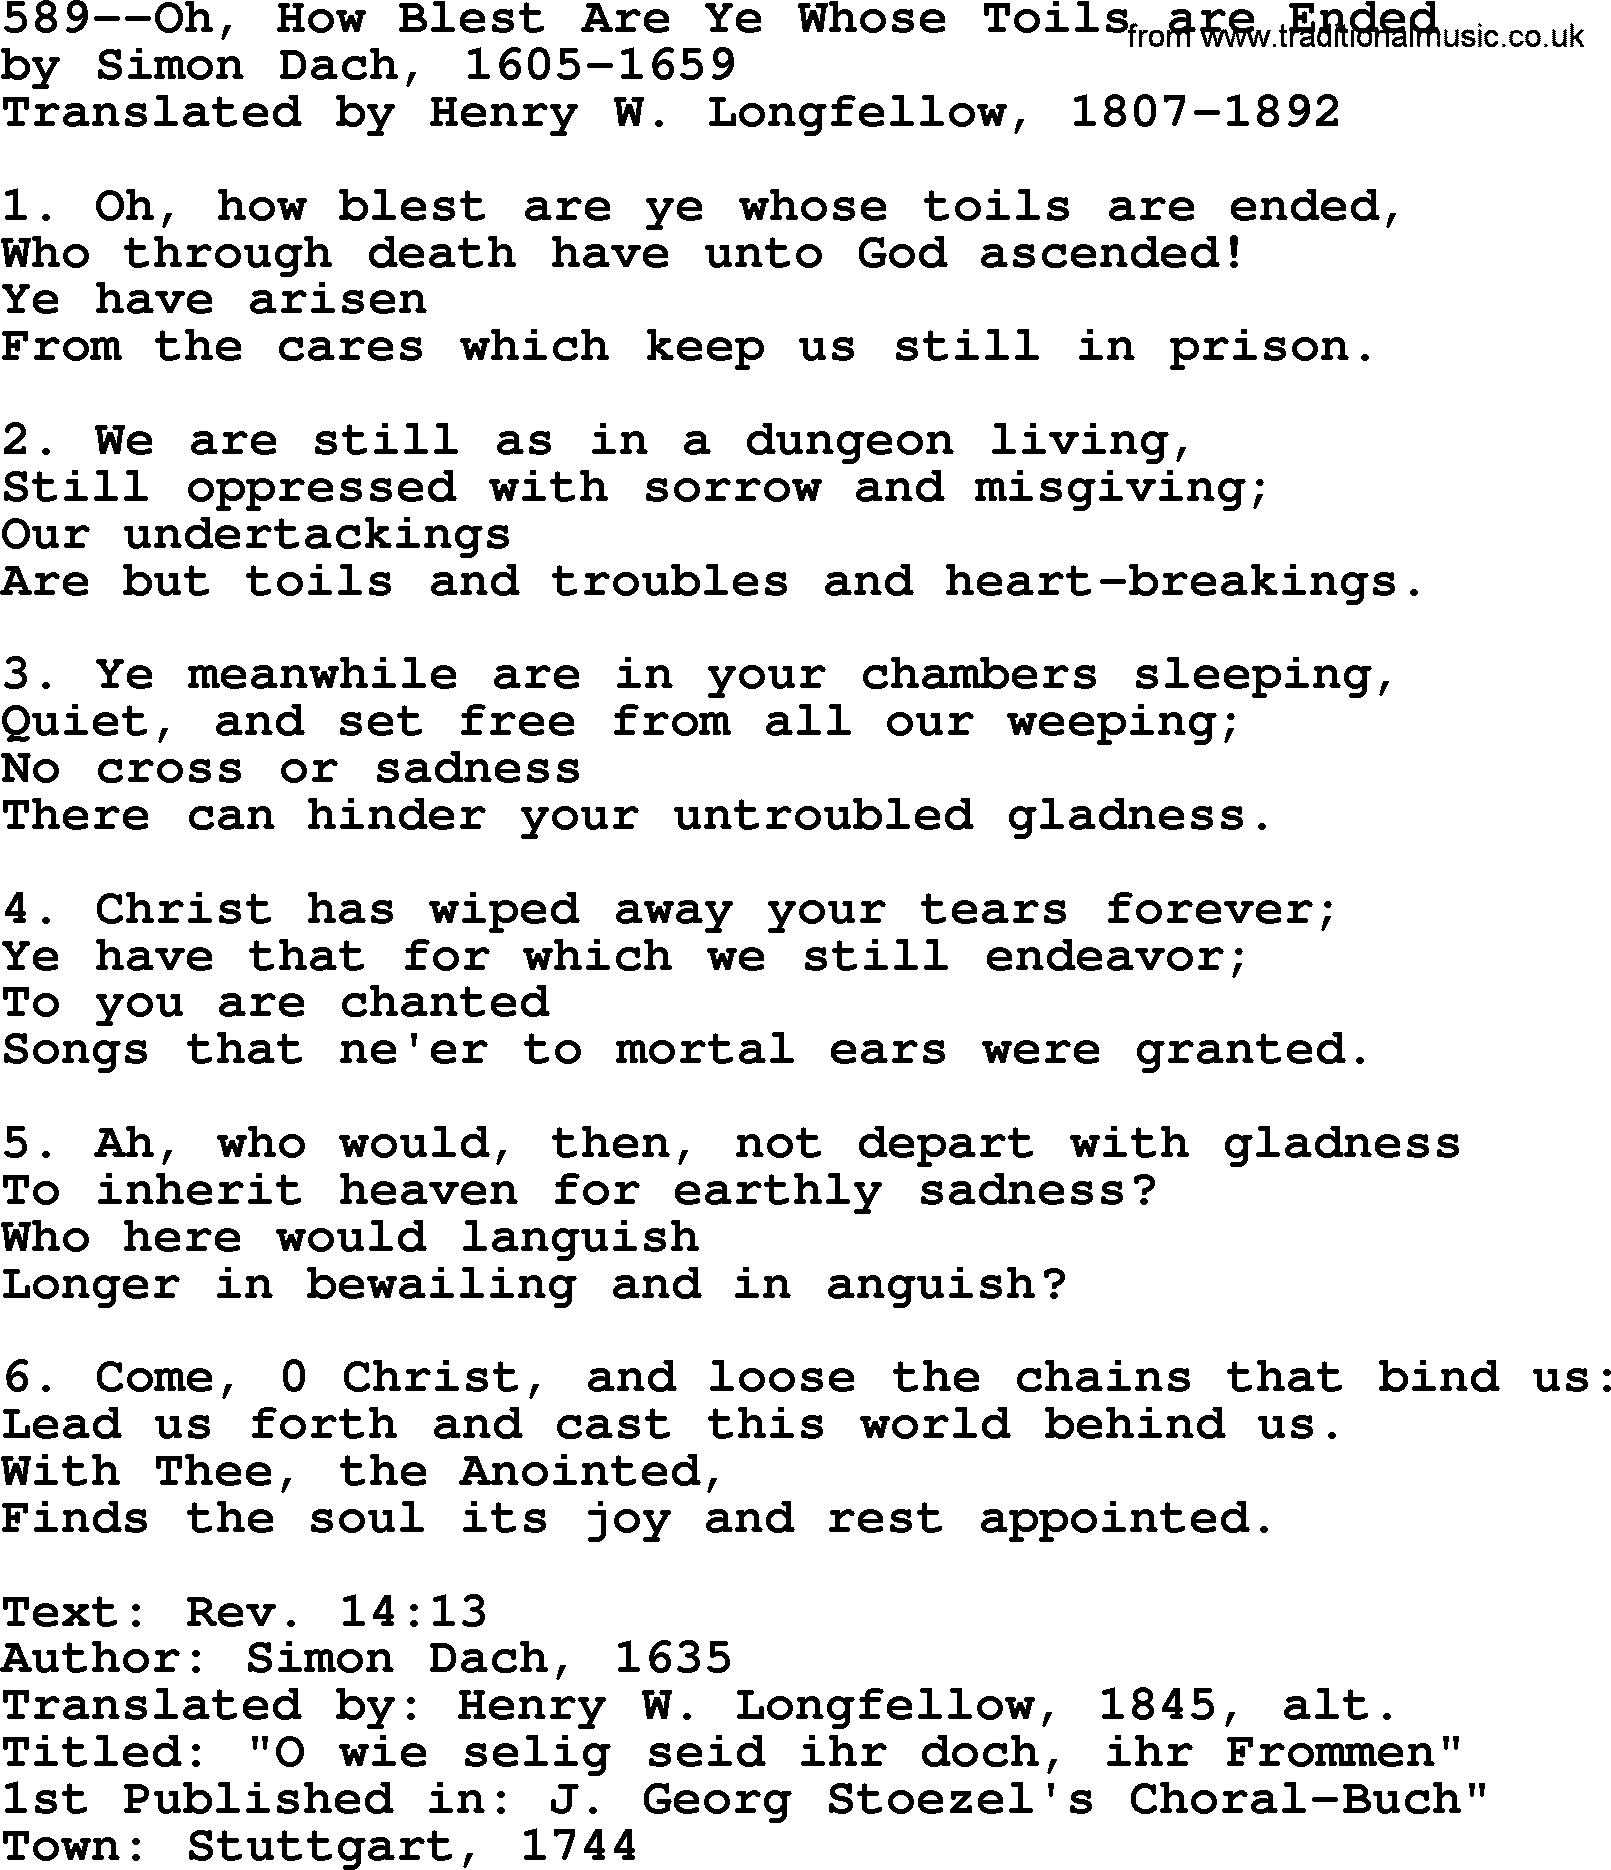 Lutheran Hymn: 589--Oh, How Blest Are Ye Whose Toils are Ended.txt lyrics with PDF